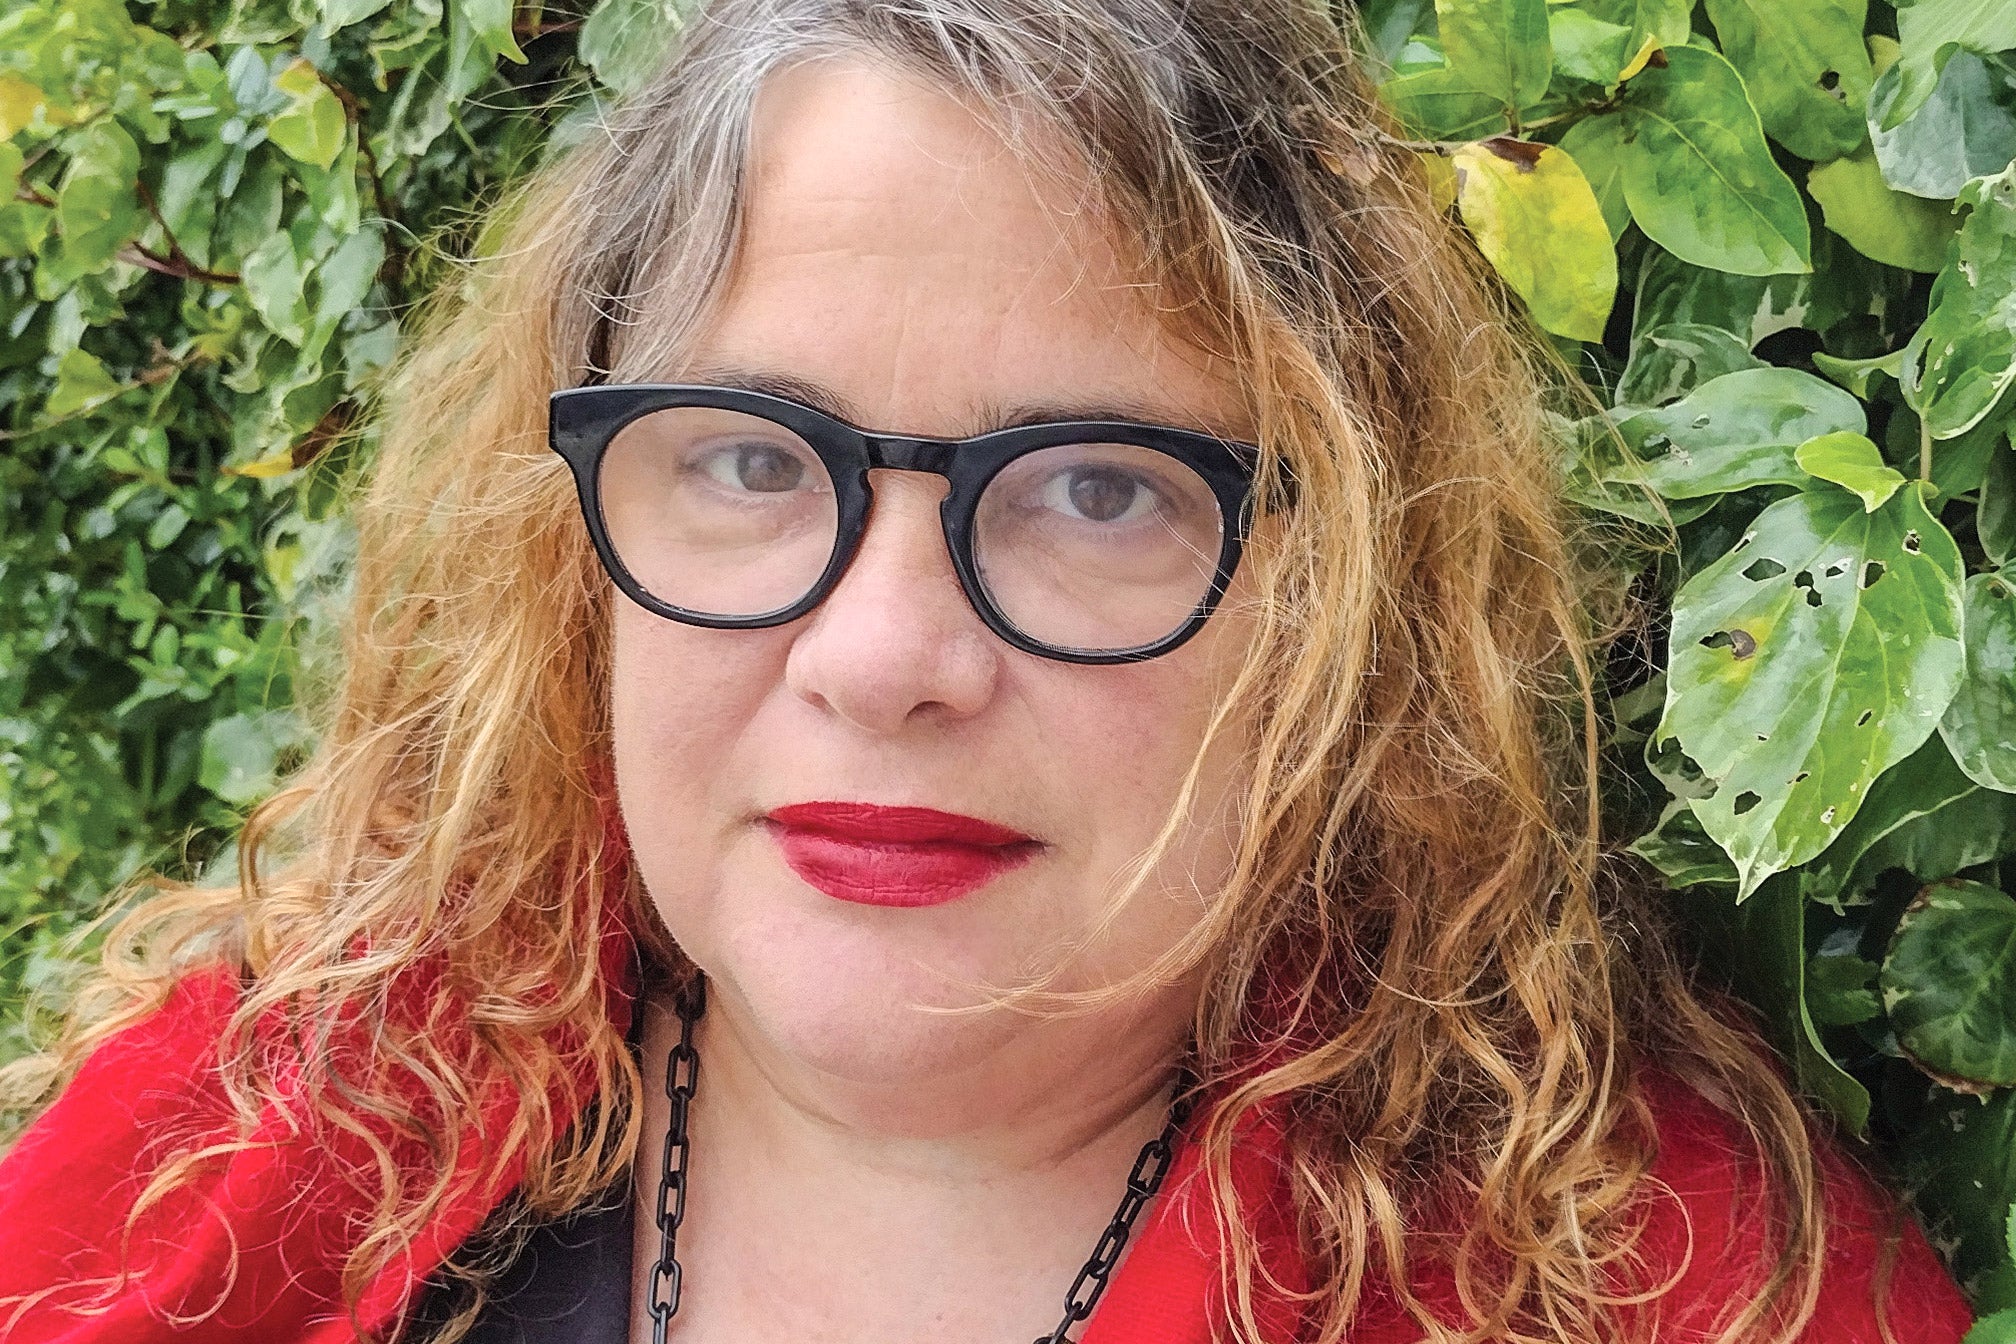 A white woman with wavy brown hair and glasses and red lipstick looks at the camera.